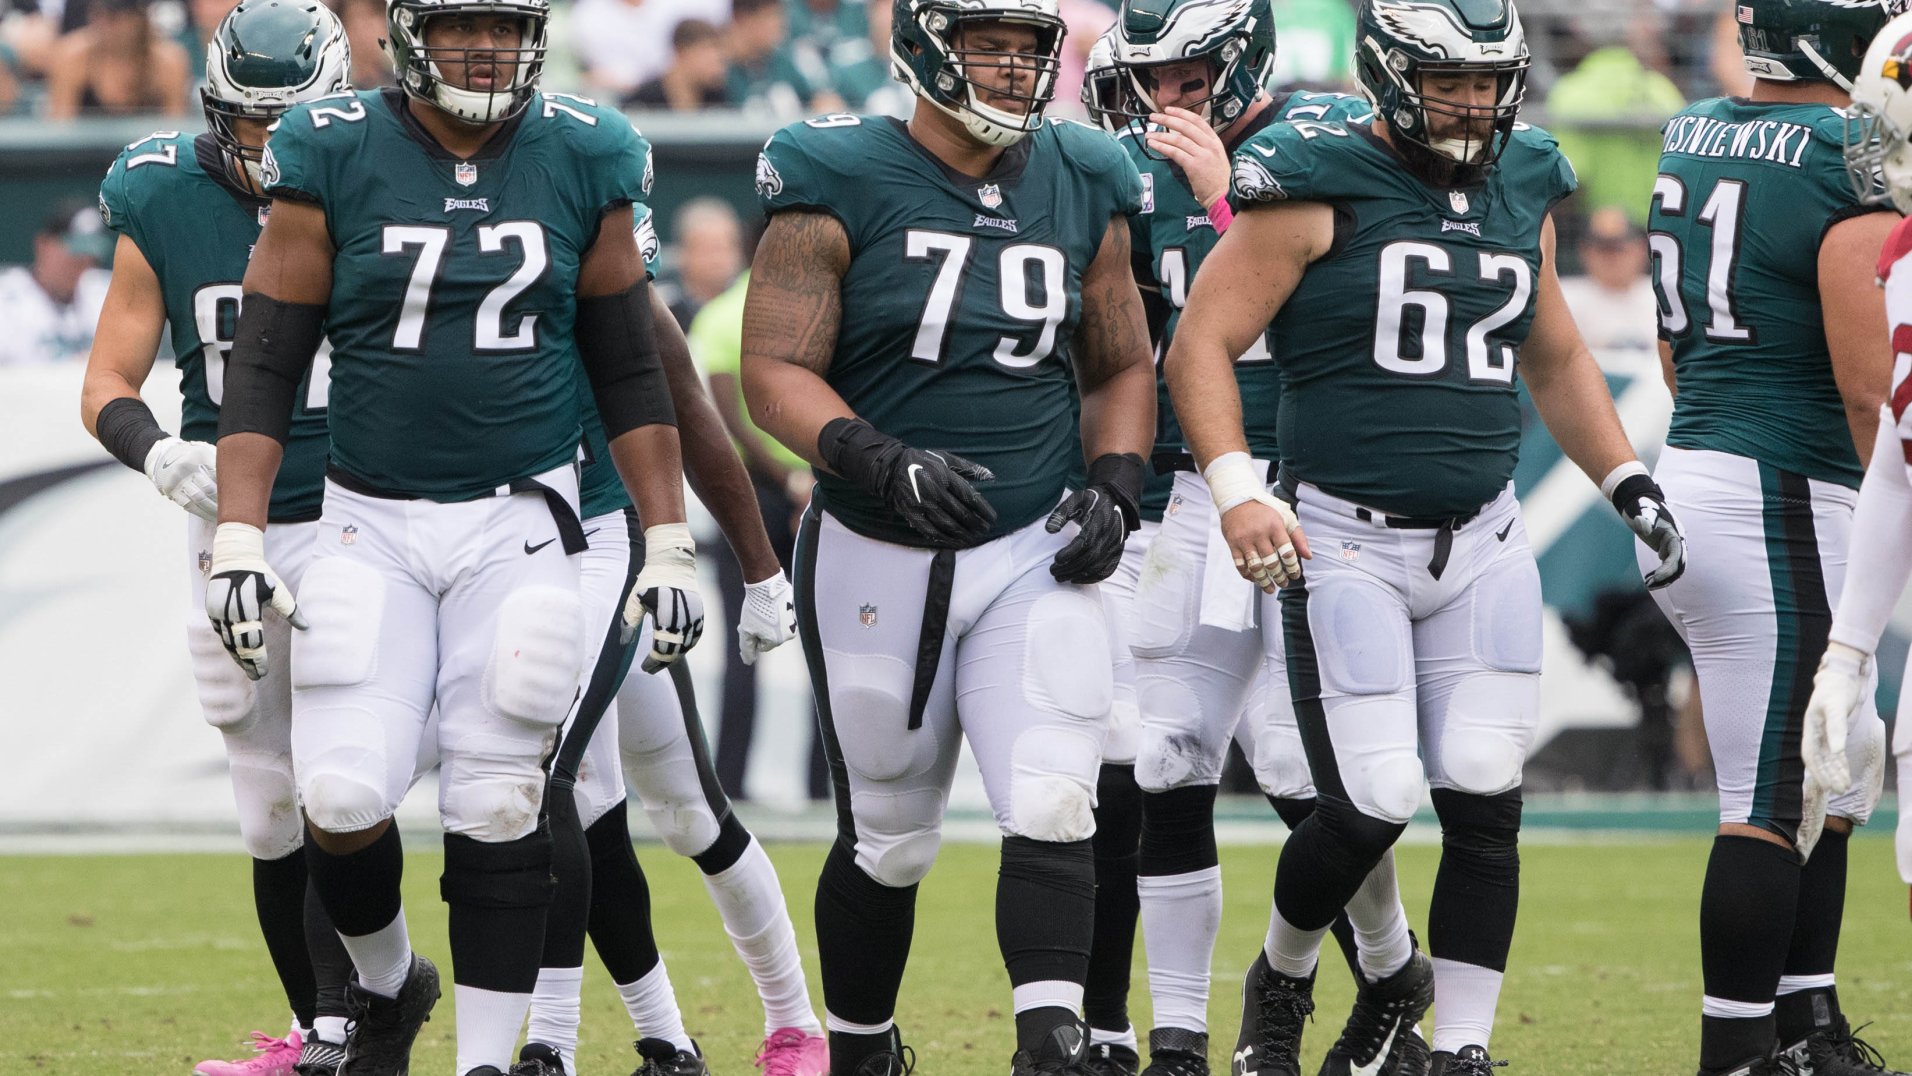 Philadelphia rides their OLine to the Super Bowl, selected as PFF's